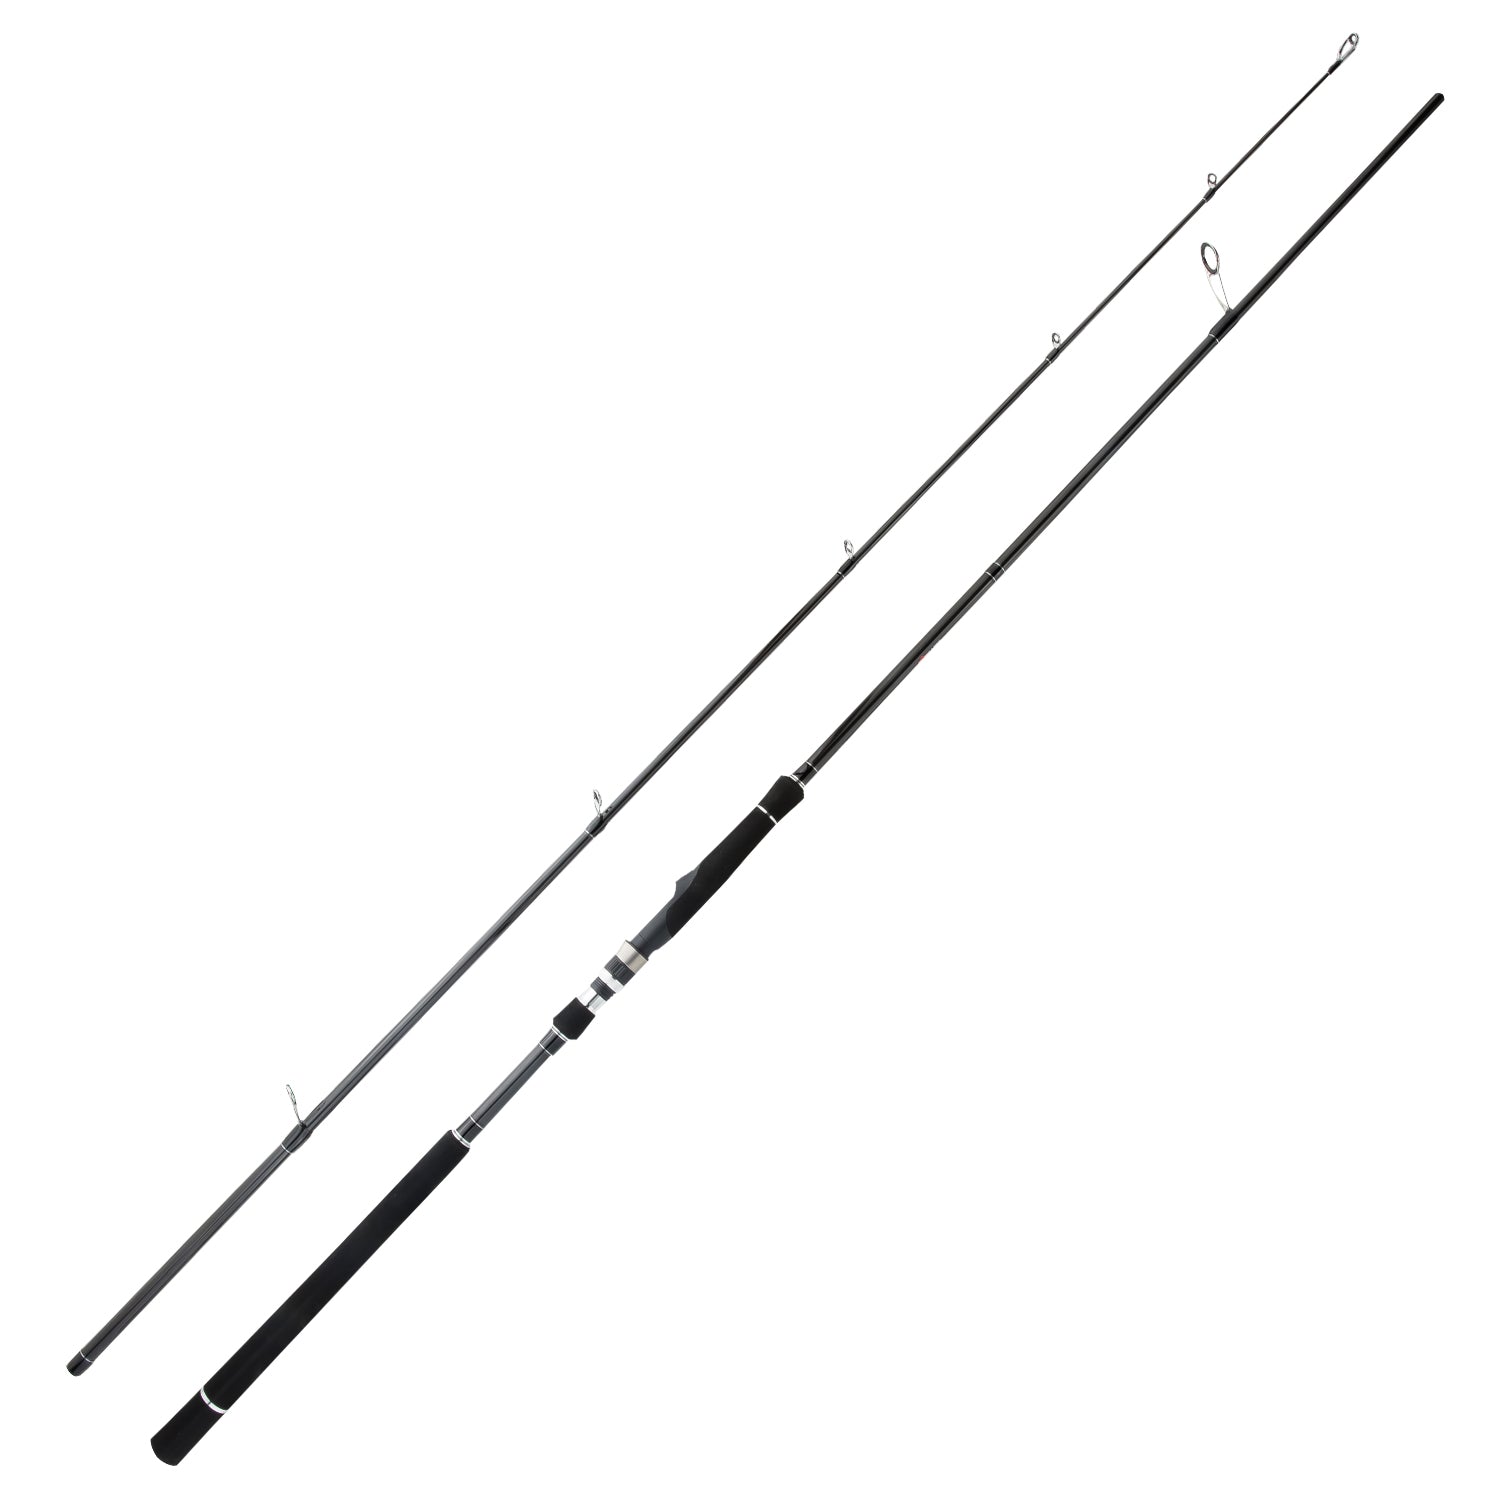 Buy Berrypro Ultralight Spinning Fishing Rod, Travel Spinning Rod with  Solid Carbon Tip Fast Action(6', 6'6'',7',7'6'') (7'6''-Ultra Light-2pc)  Online at Low Prices in India 